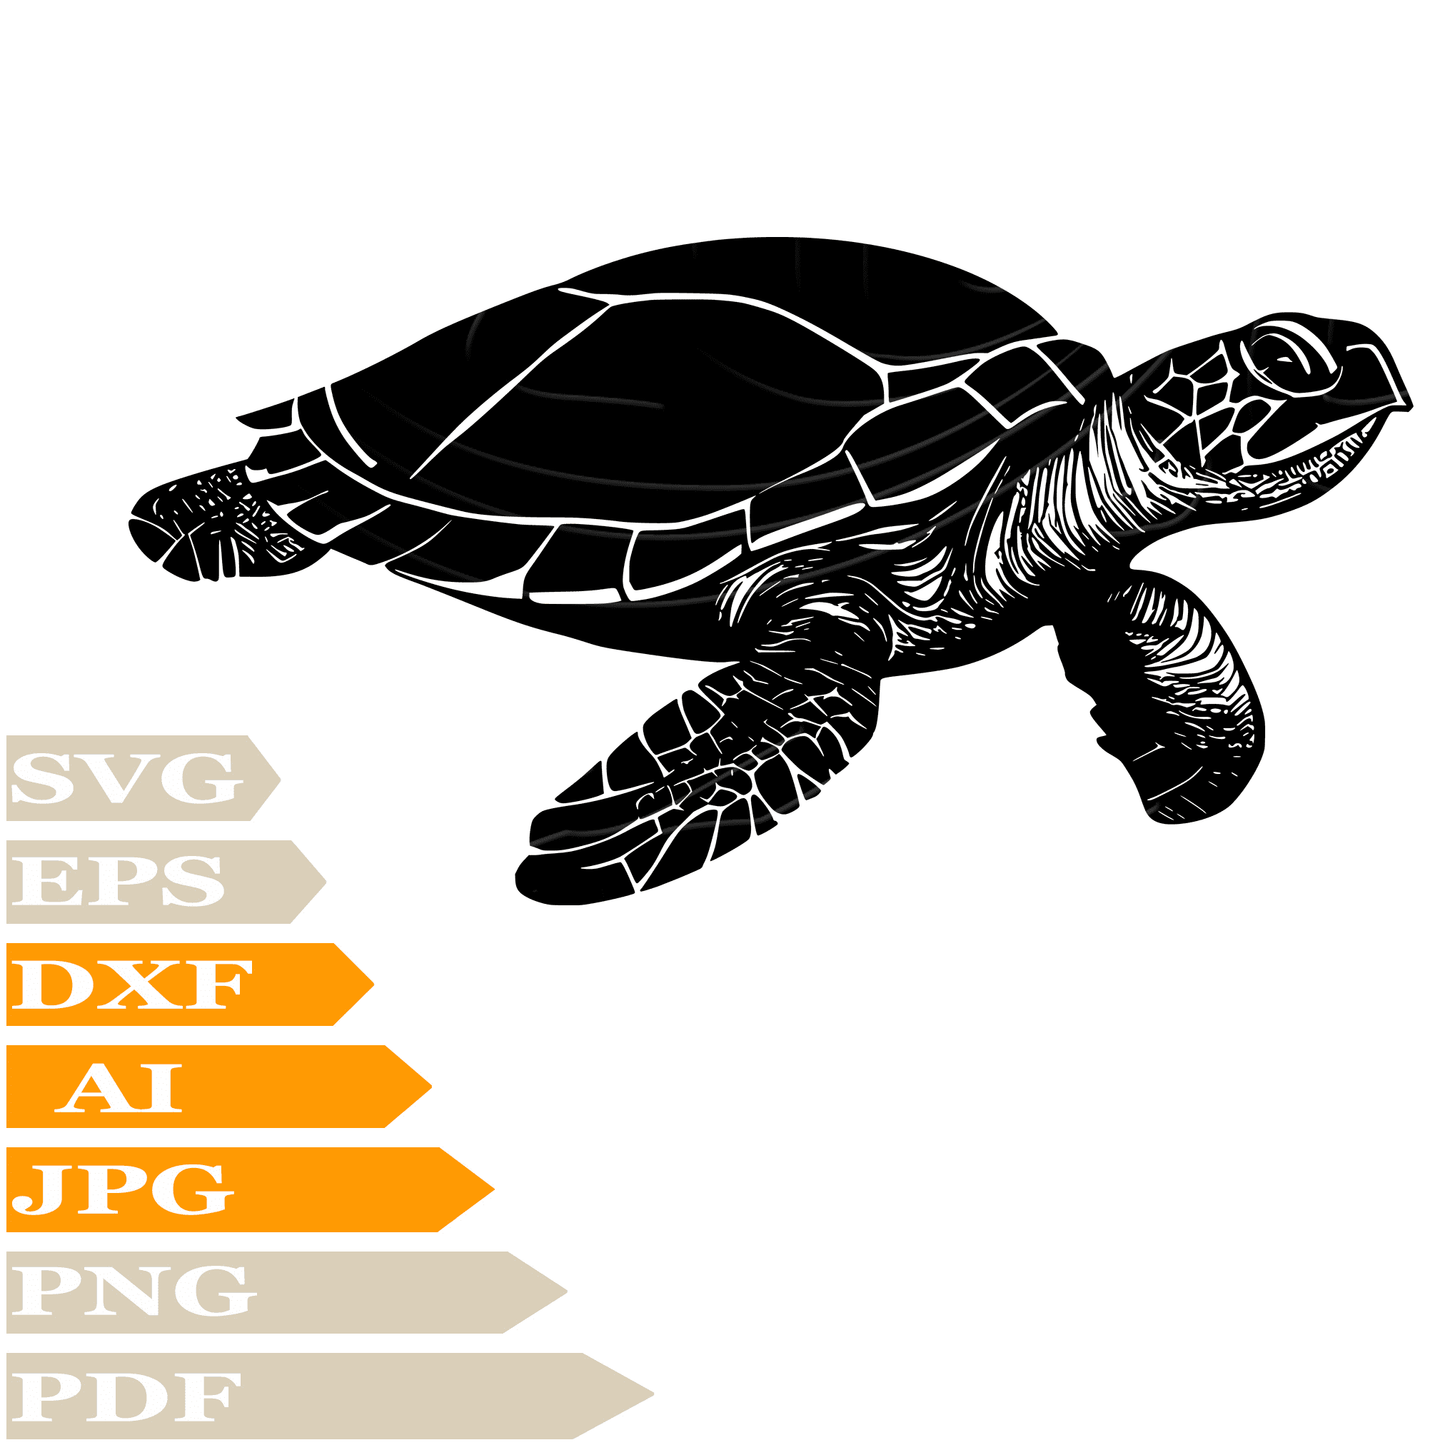 Turtle SVG-Sea Turtle Personalized SVG-Sea Turtle Drawing SVG-Sea Turtle Reptilia Vector ClipArt's-SVG Cut Files-Illustration-PNG-Decal-Circuit-Digital Files-For Shirts-Silhouette